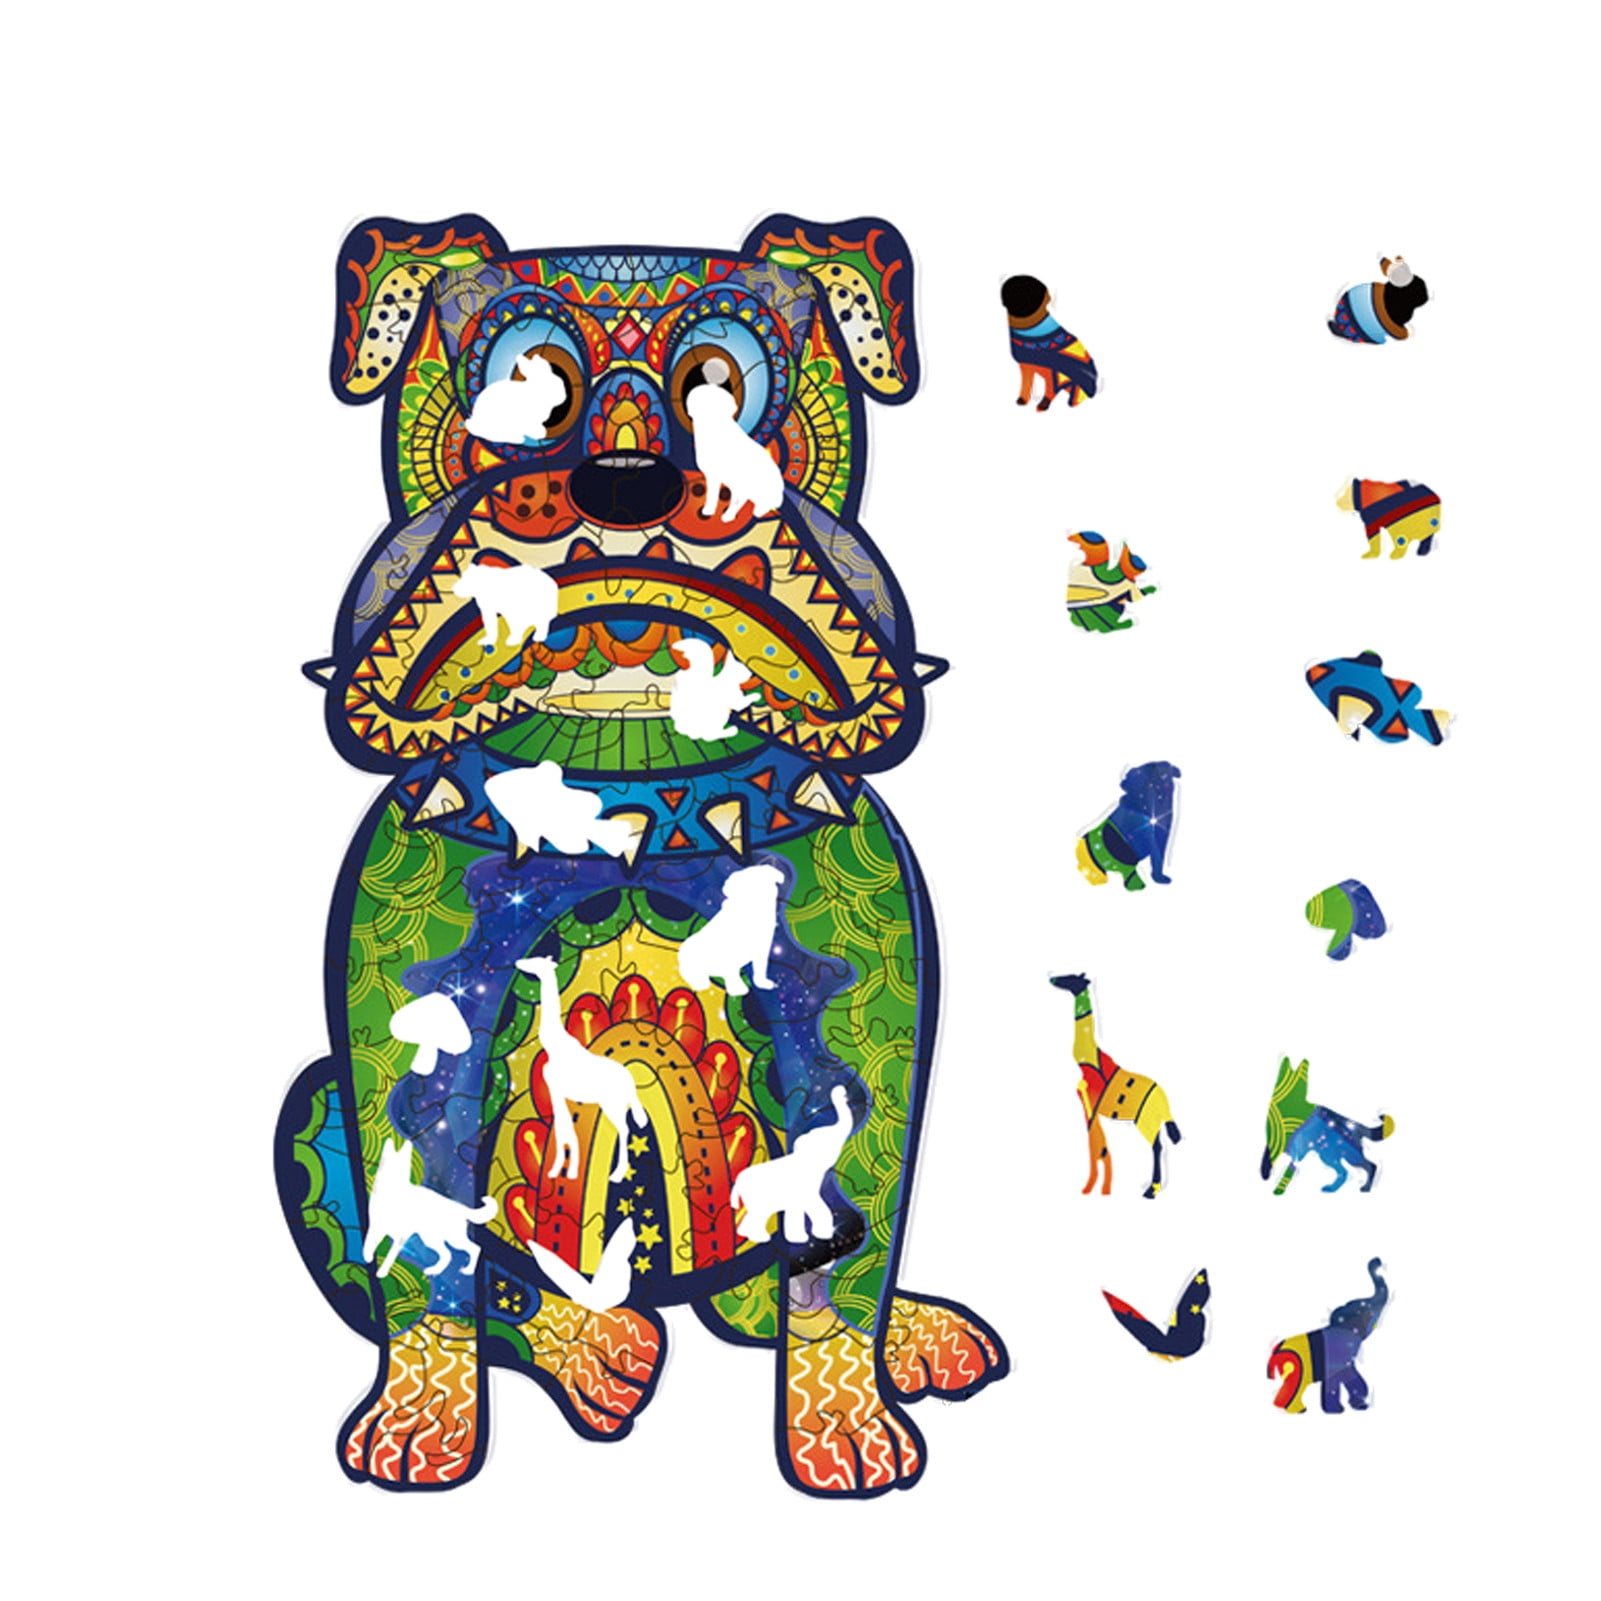 Details about   Wooden Jigsaw Puzzles Unique Animal Jigsaw Pieces Best Gift for Adult and Kids